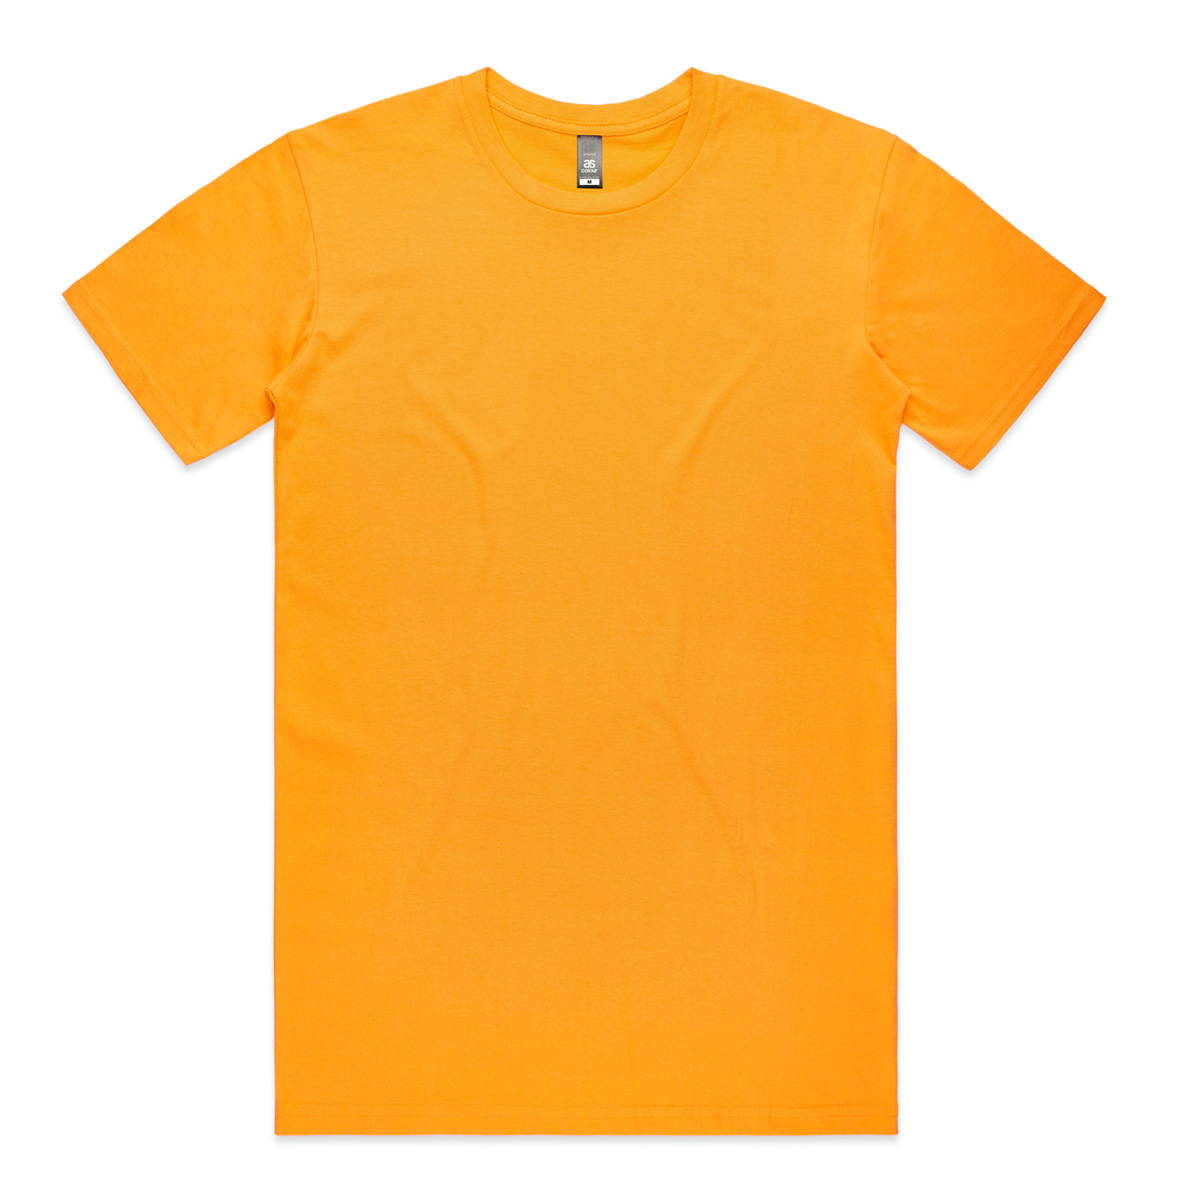 What is the difference between The AS Colour staple tee and standard t ...